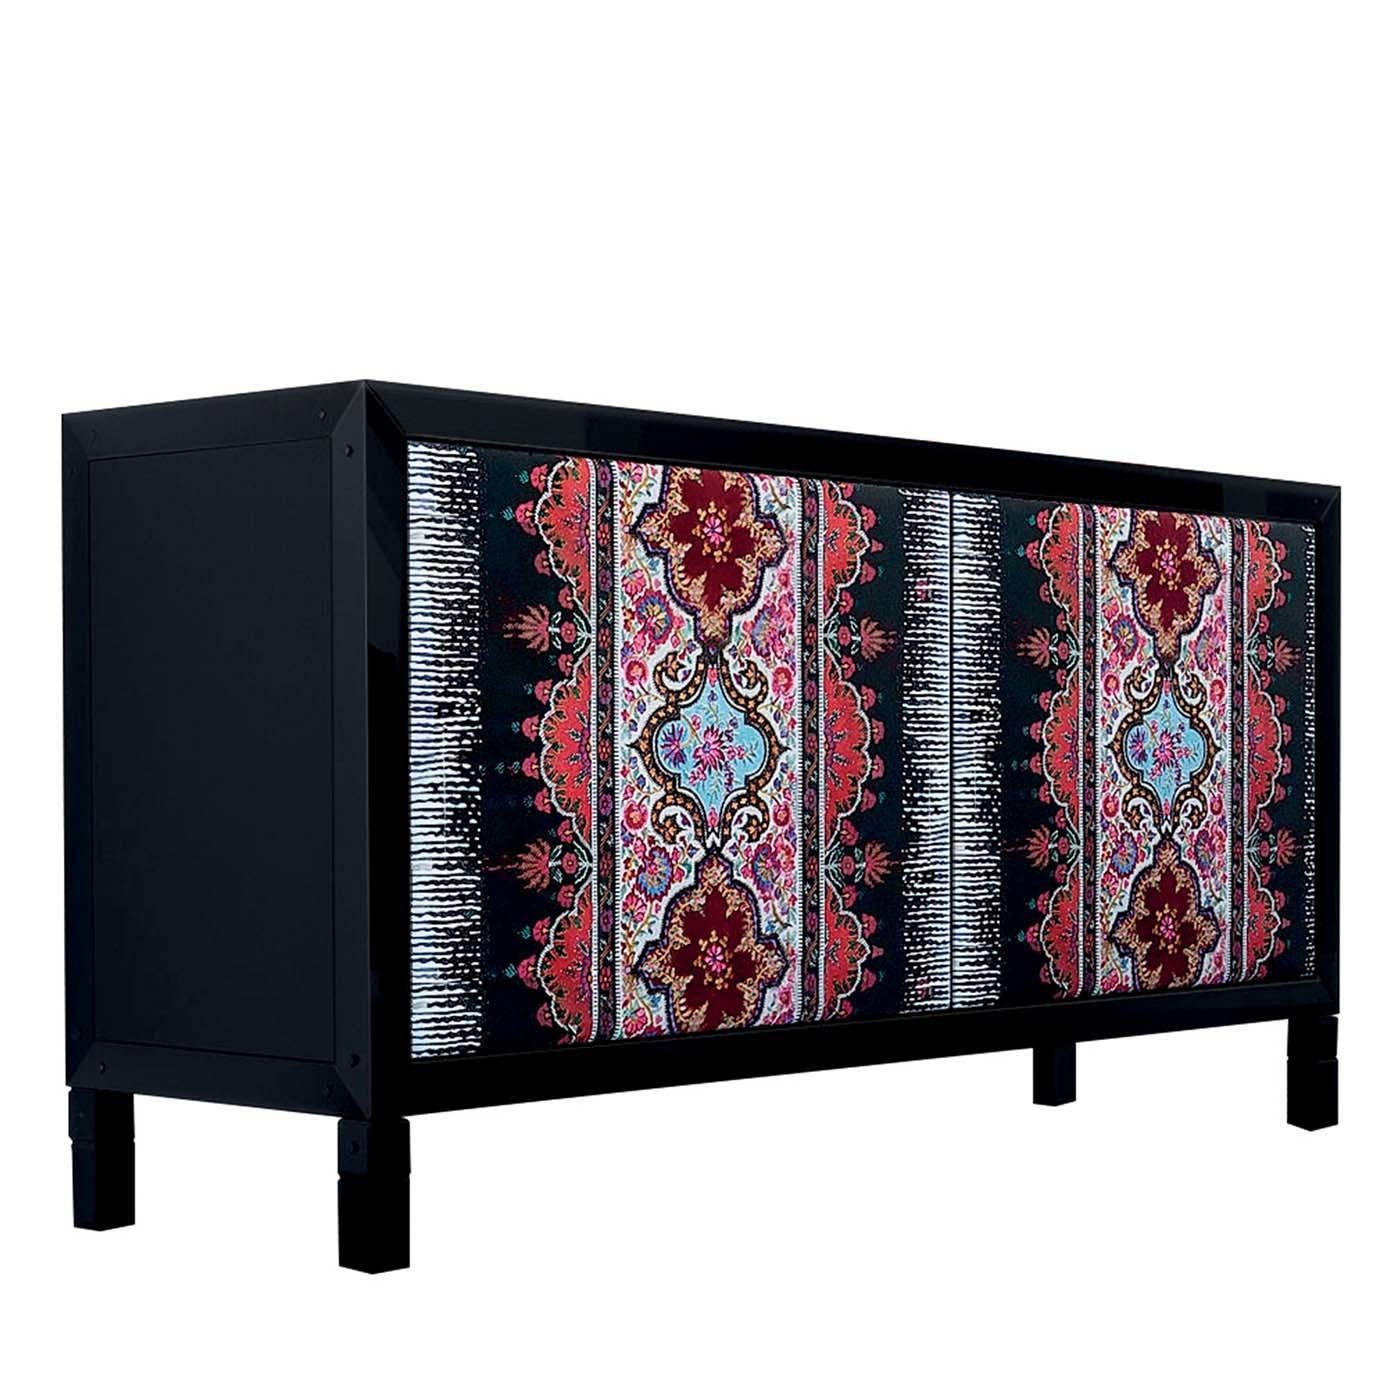 Part of the Quadra collection, this sideboard's door panels are upholstered with a splendid embroidered fabric (65% linen, 20% polyester and 15% cotton), that enlivens the austere black-lacquered frame of Toulipier walnut wood and Tanganica veneer.